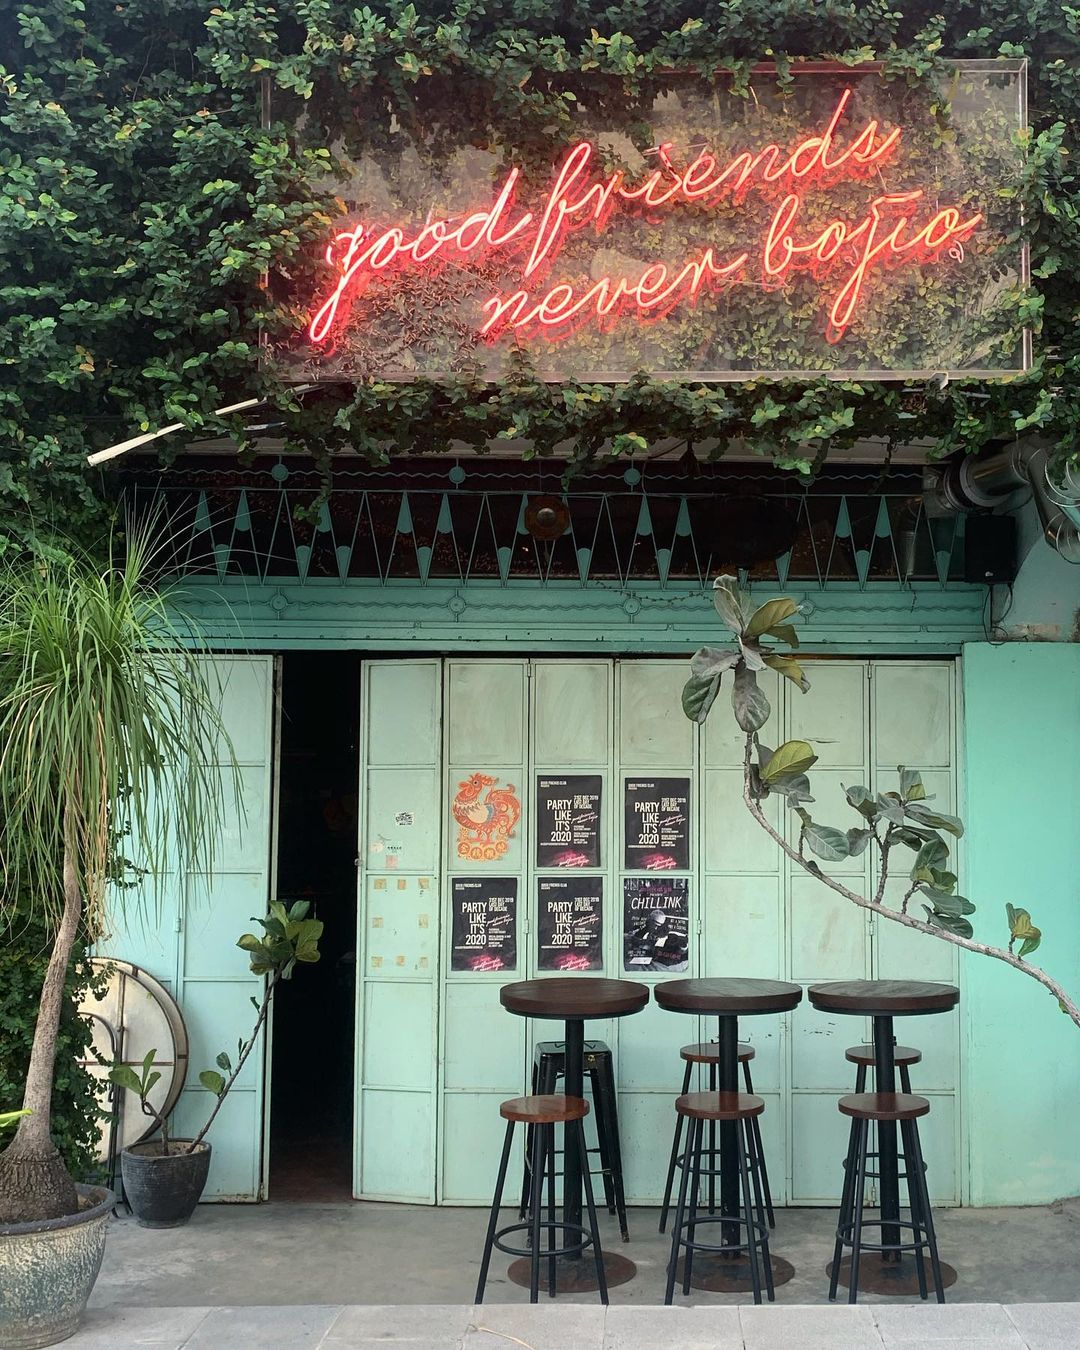 Things to do in penang - goodfriends